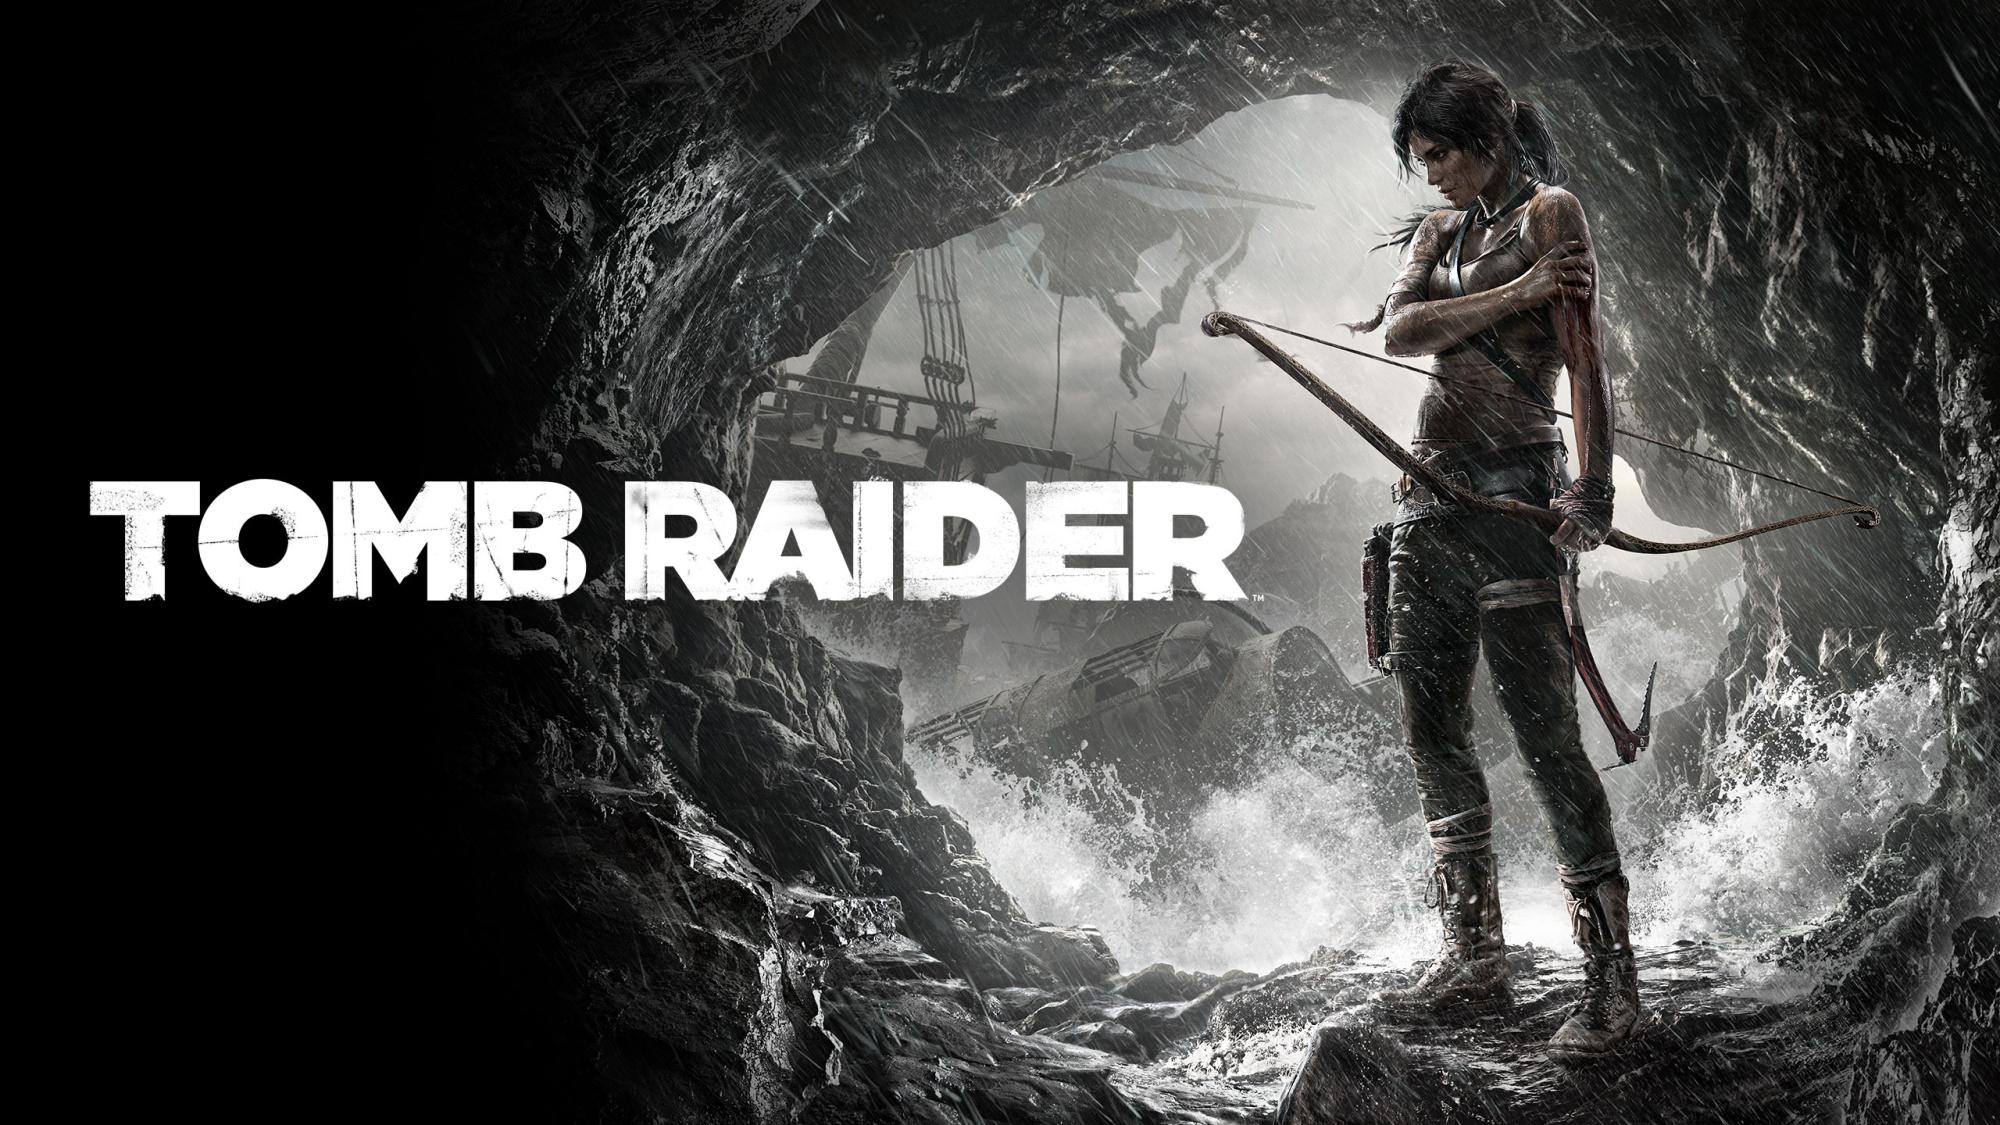 Tomb Raider GAME OF THE YEAR EDITION | Download and Buy Today - Epic Games Store